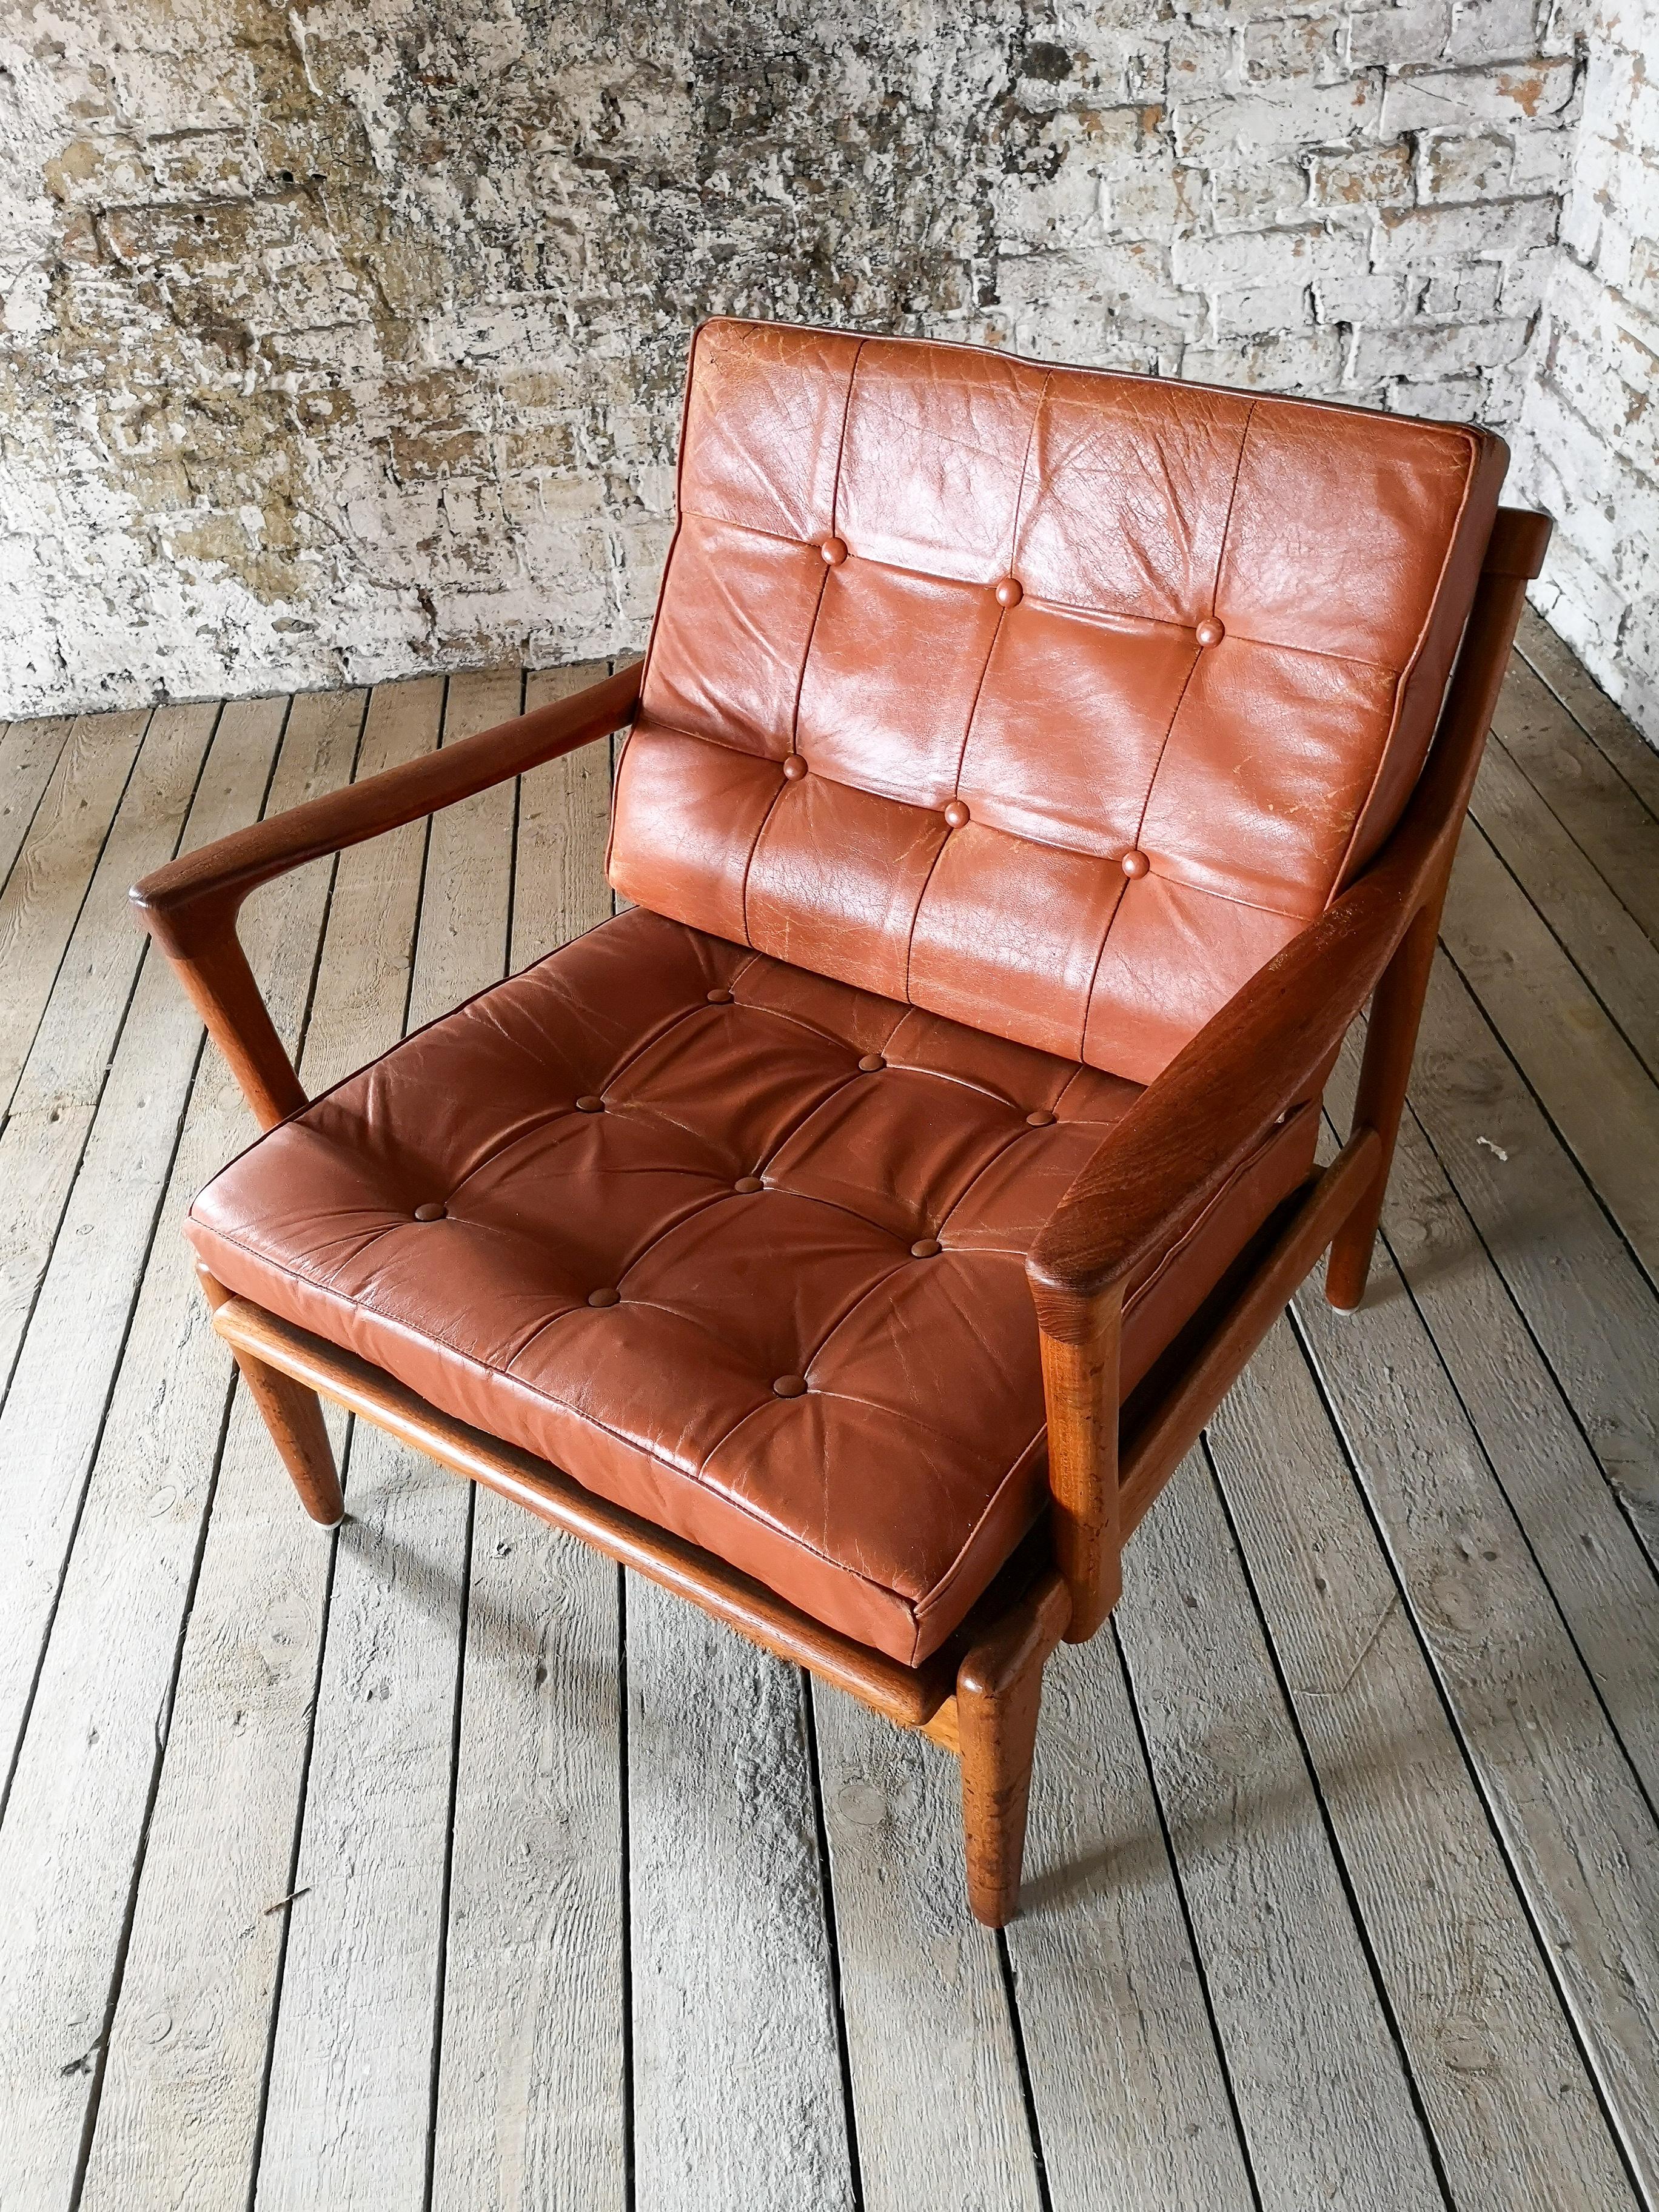 Easy chair model Kuba designed by Bertil Fridhagen. Produced by Bröderna Andersson in Sweden. Original Cognac brown leather and teak gives this chair a cool vintage look. 

New fabric stripes to the chair have been made, the leather with a little